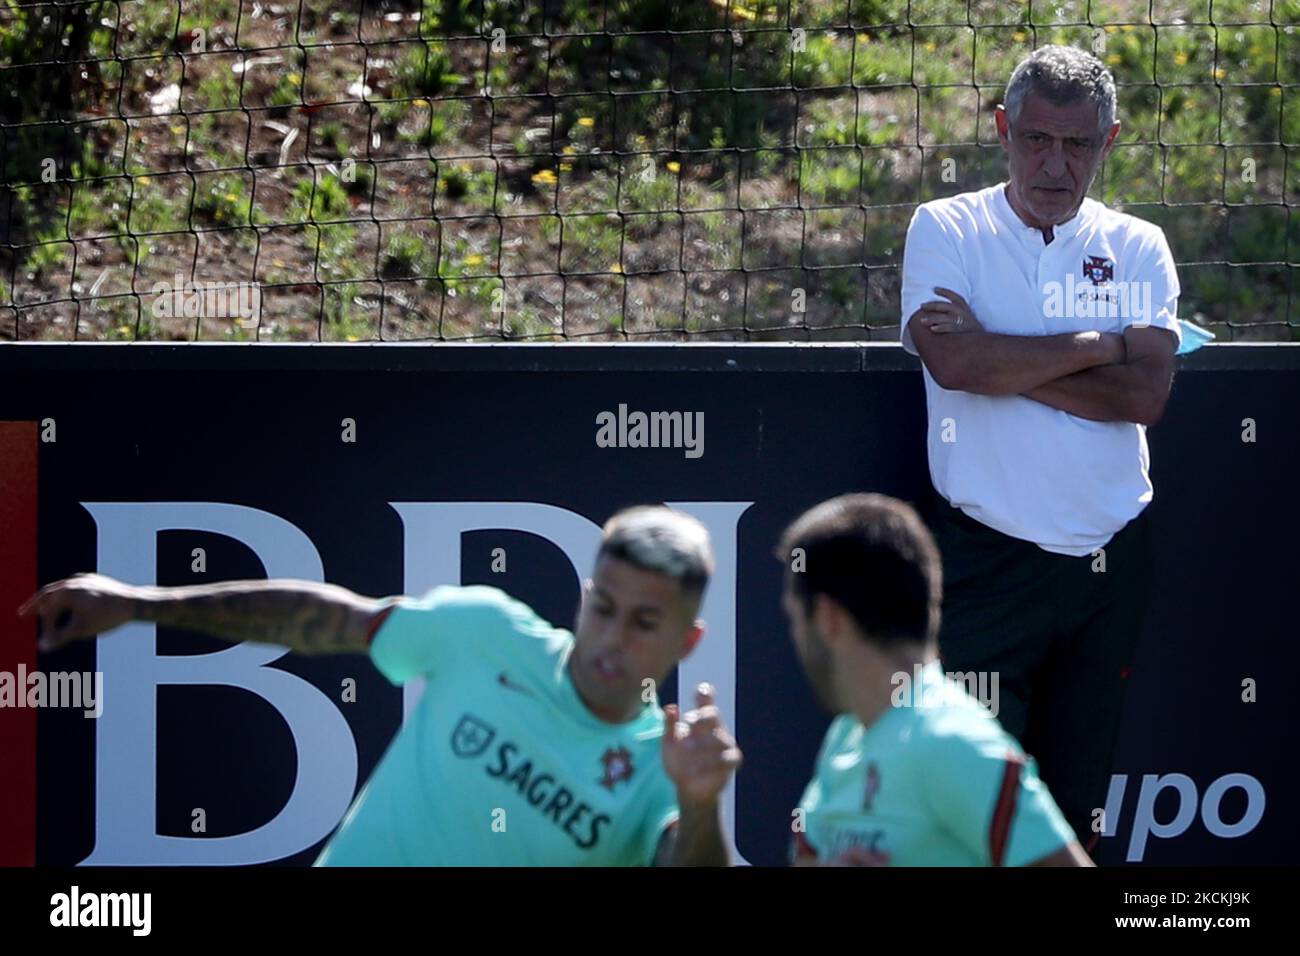 Portugal's head coach Fernando Santos attends a training session at Cidade do Futebol training camp in Oeiras, Portugal, on August 31, 2021, as part of the team's preparation for the upcoming FIFA World Cup Qatar 2022 qualifying football match against Ireland. (Photo by Pedro FiÃºza/NurPhoto) Stock Photo